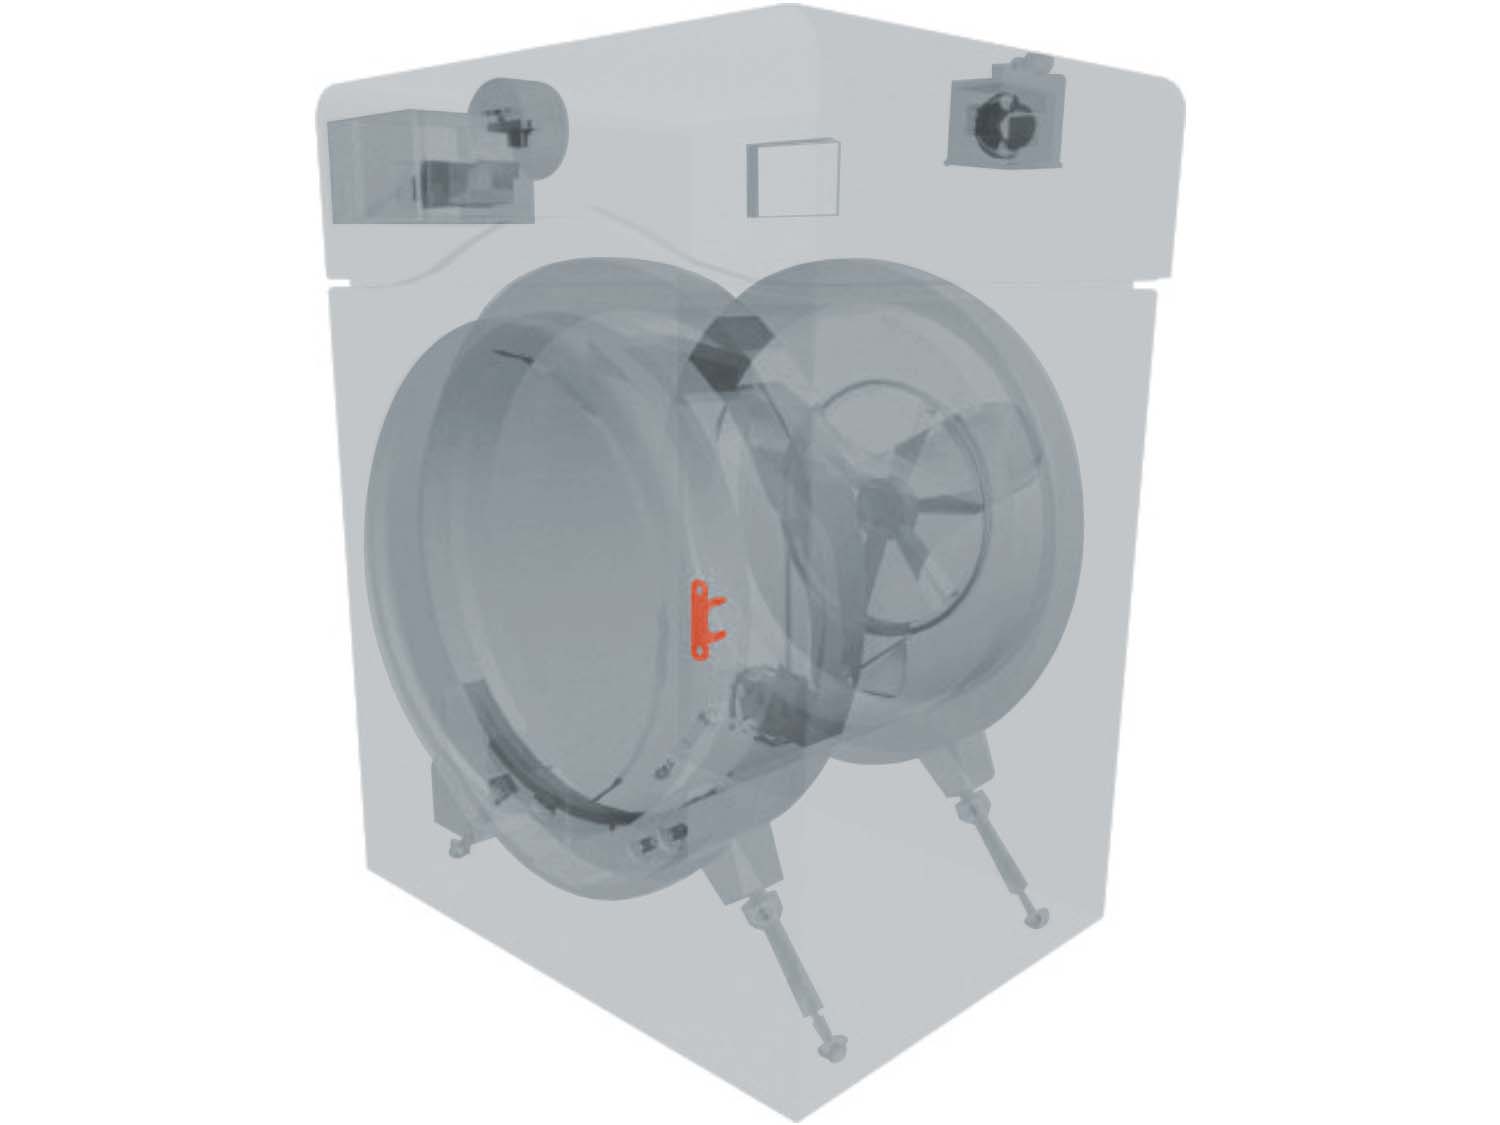 A 3D diagram showing the components of a washer and specifying the location of the door strike